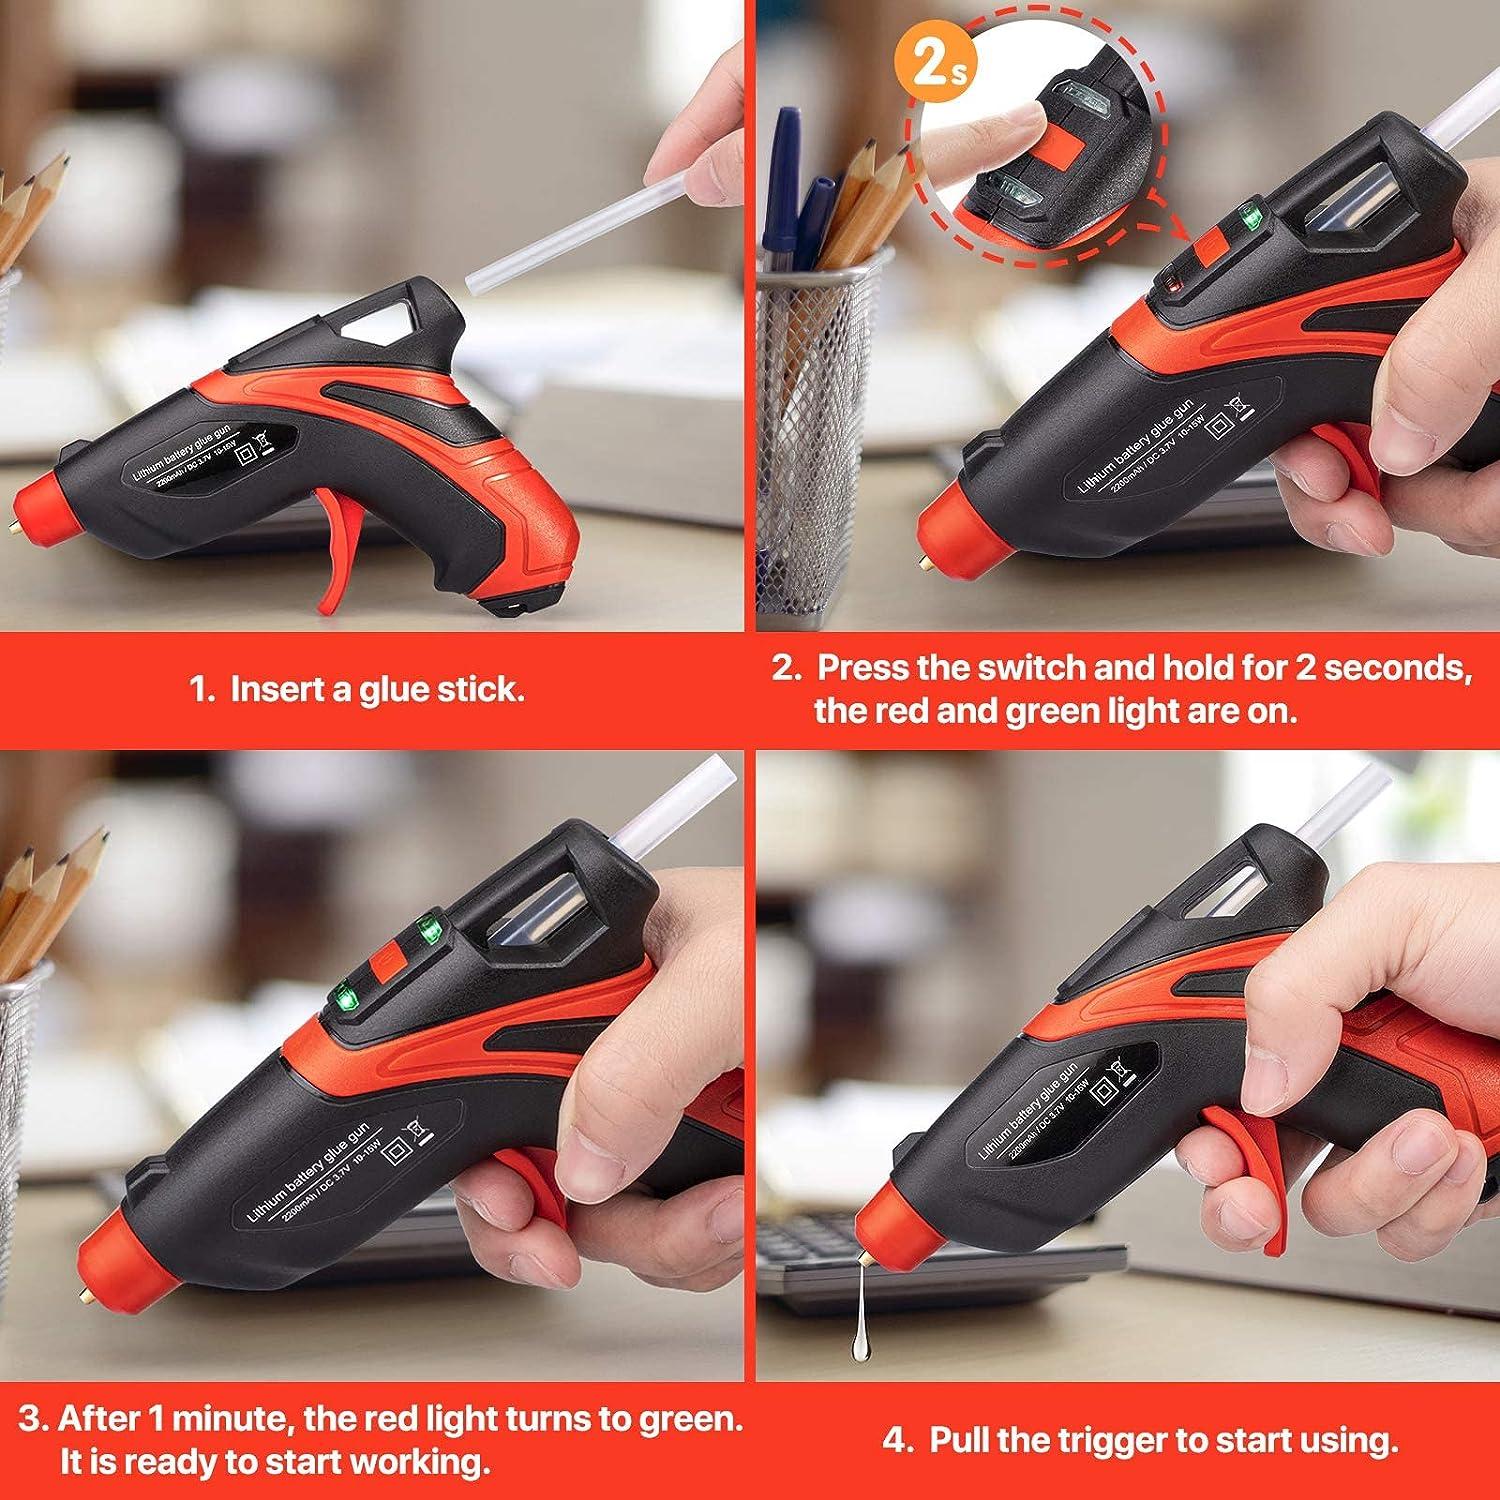 How To Make Rechargeable Glue Gun At Home 